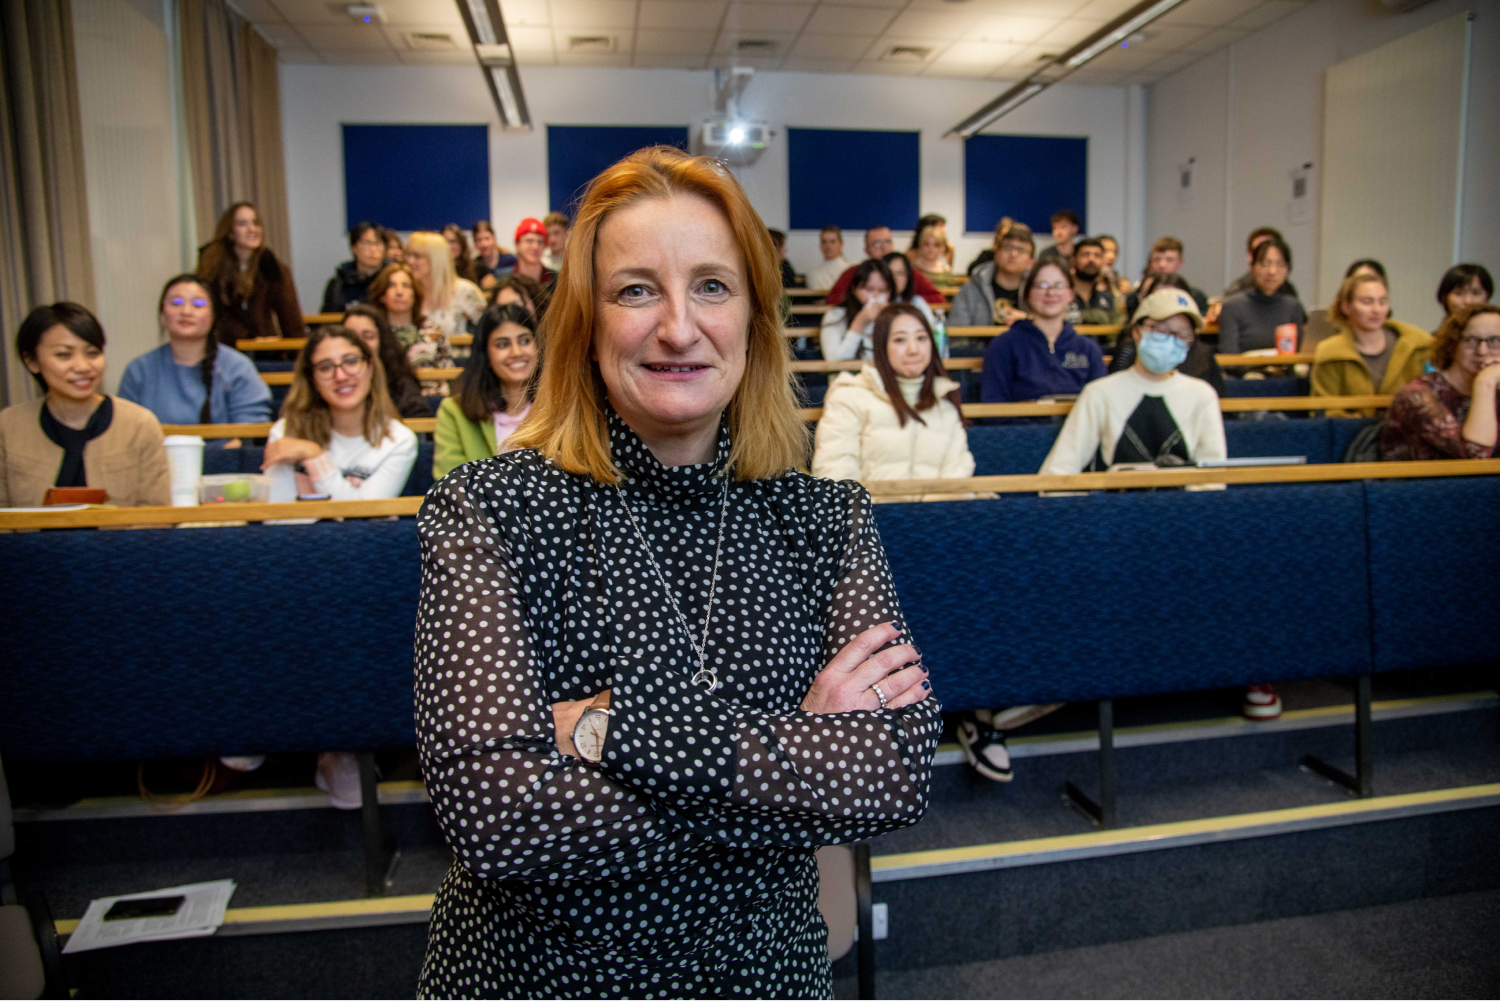 Alison Phillips stands before a full lecture hall with arms folded